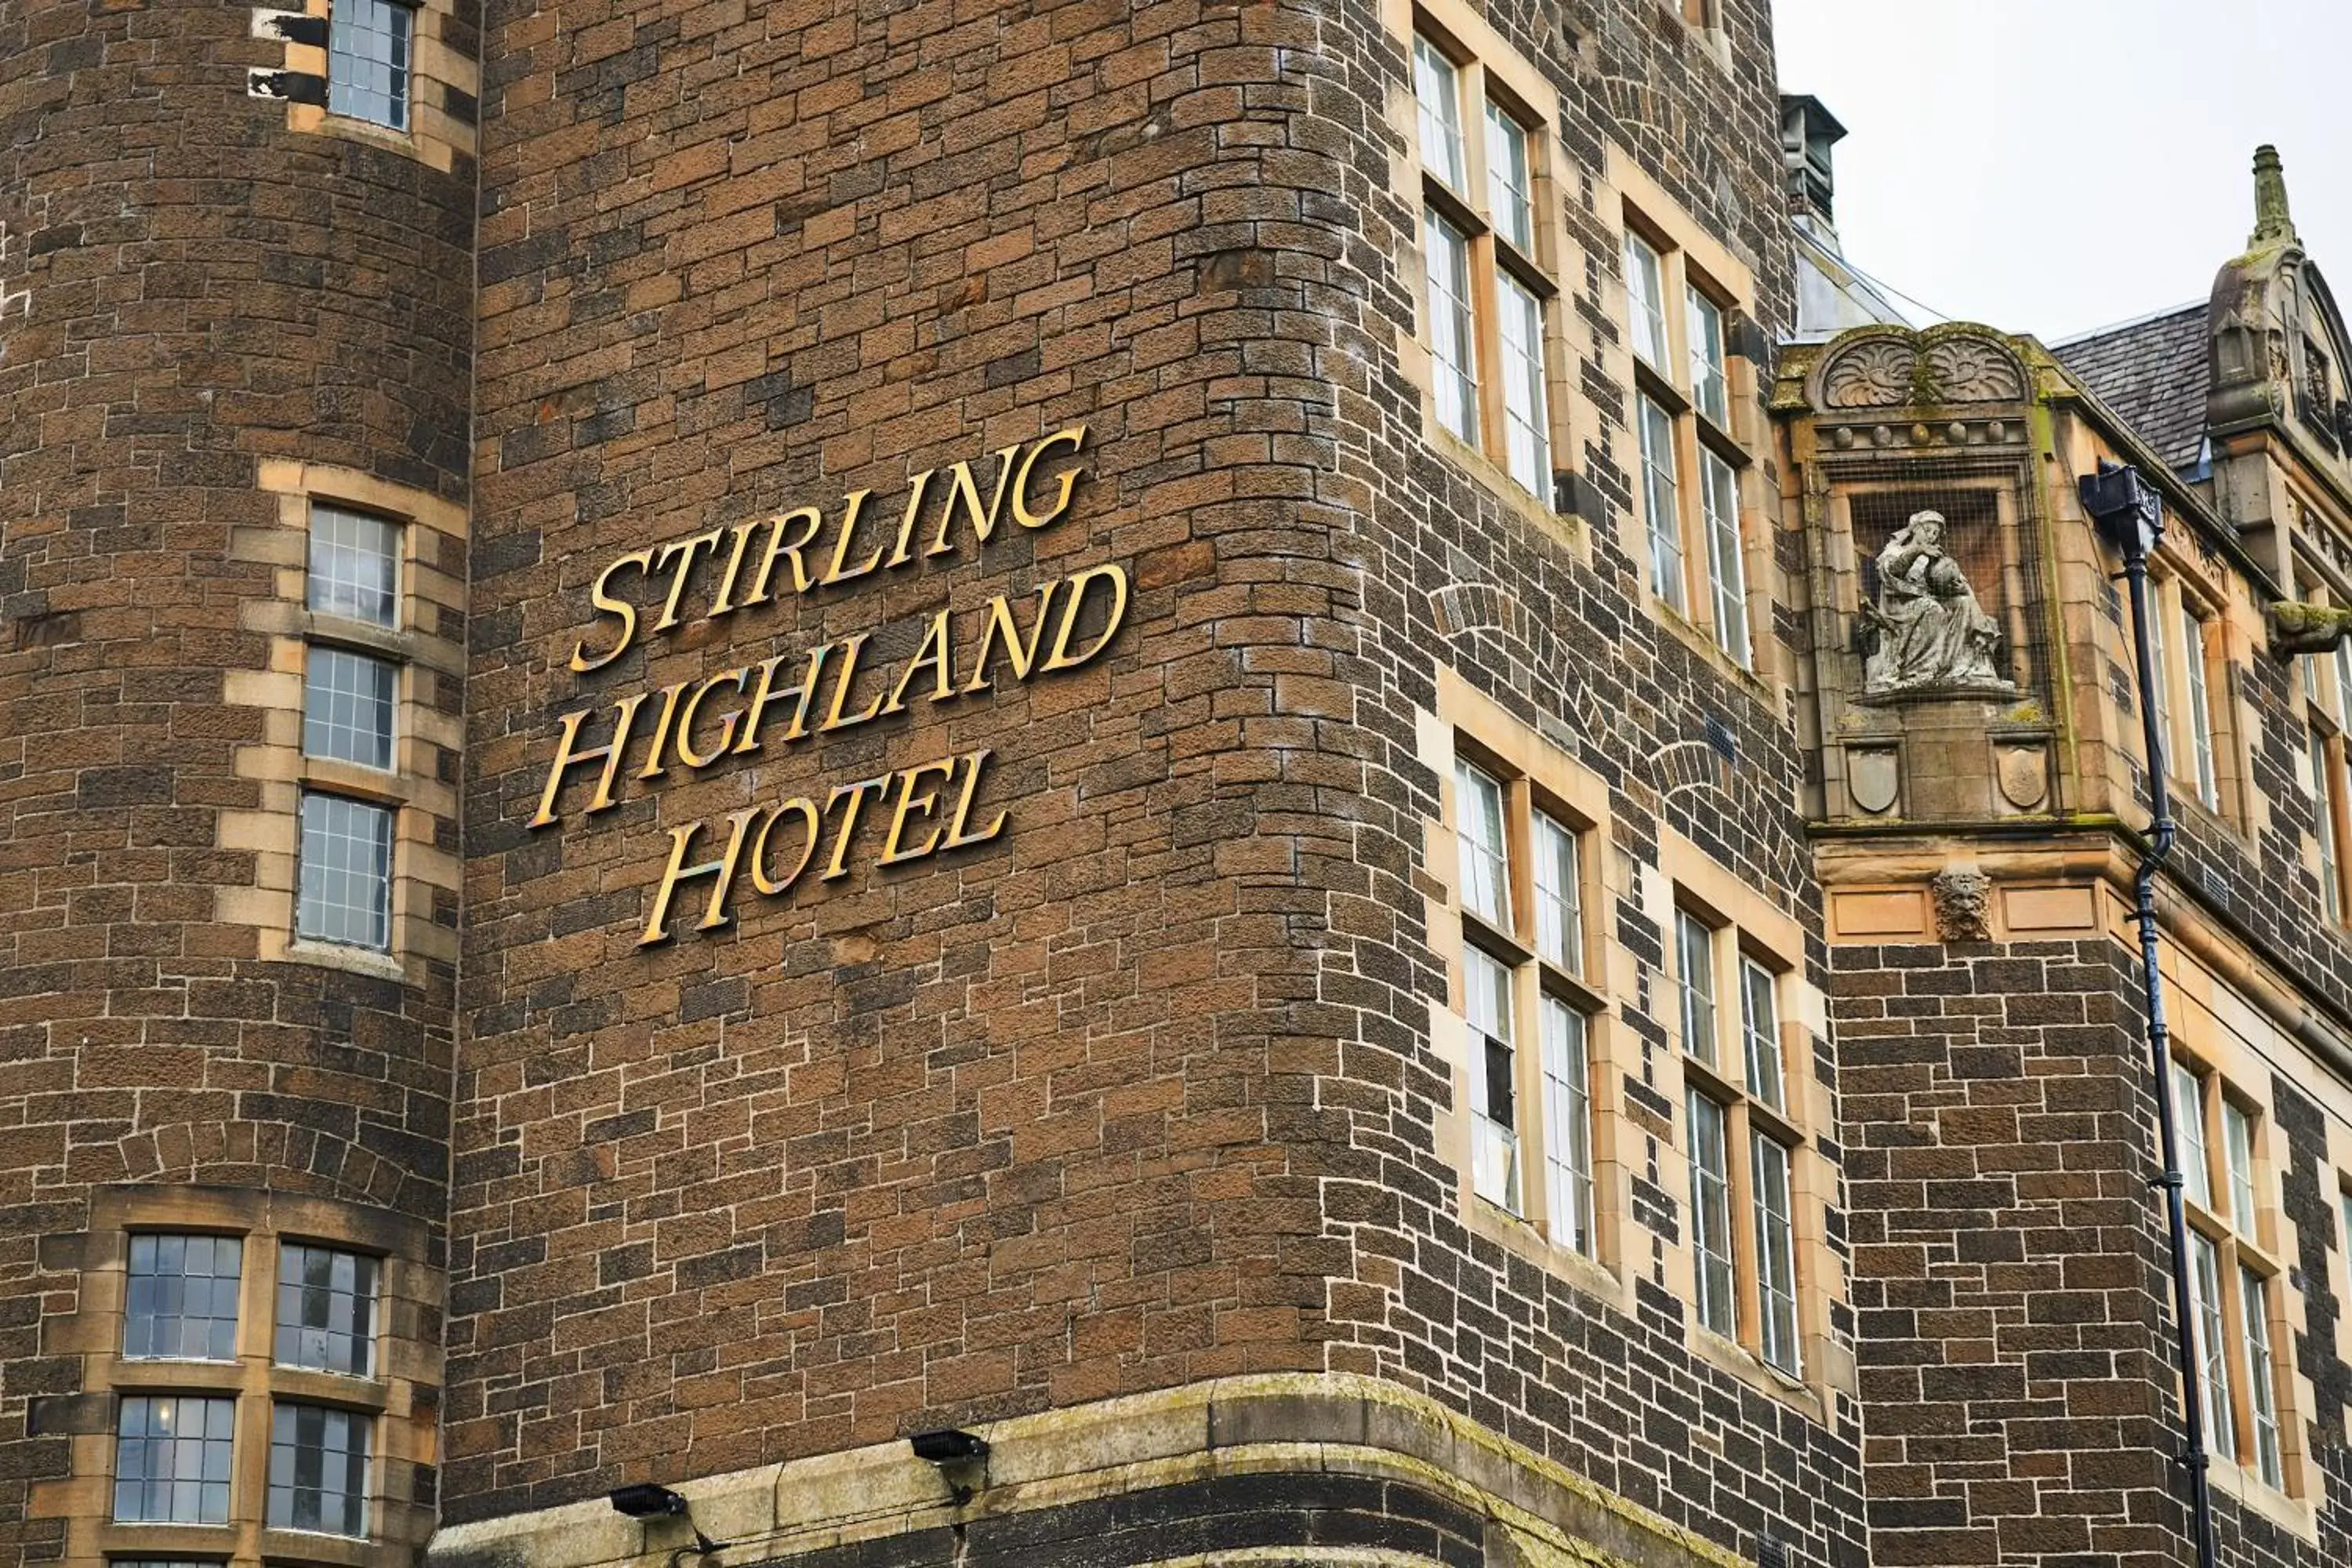 Property building in Stirling Highland Hotel- Part of the Cairn Collection